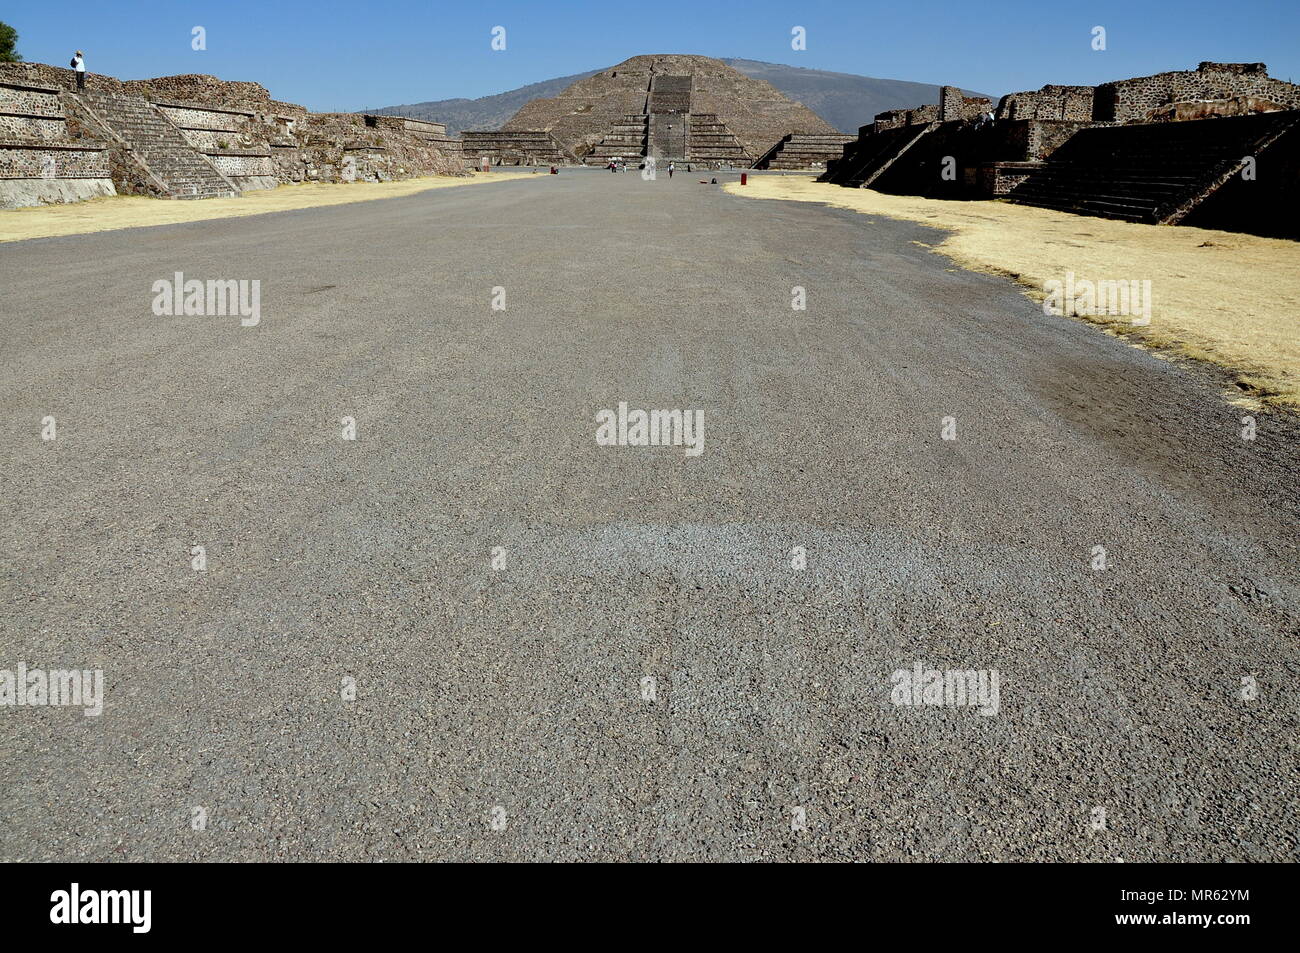 Avenue of the Dead - Teotihuacan, Mexico Stock Photo